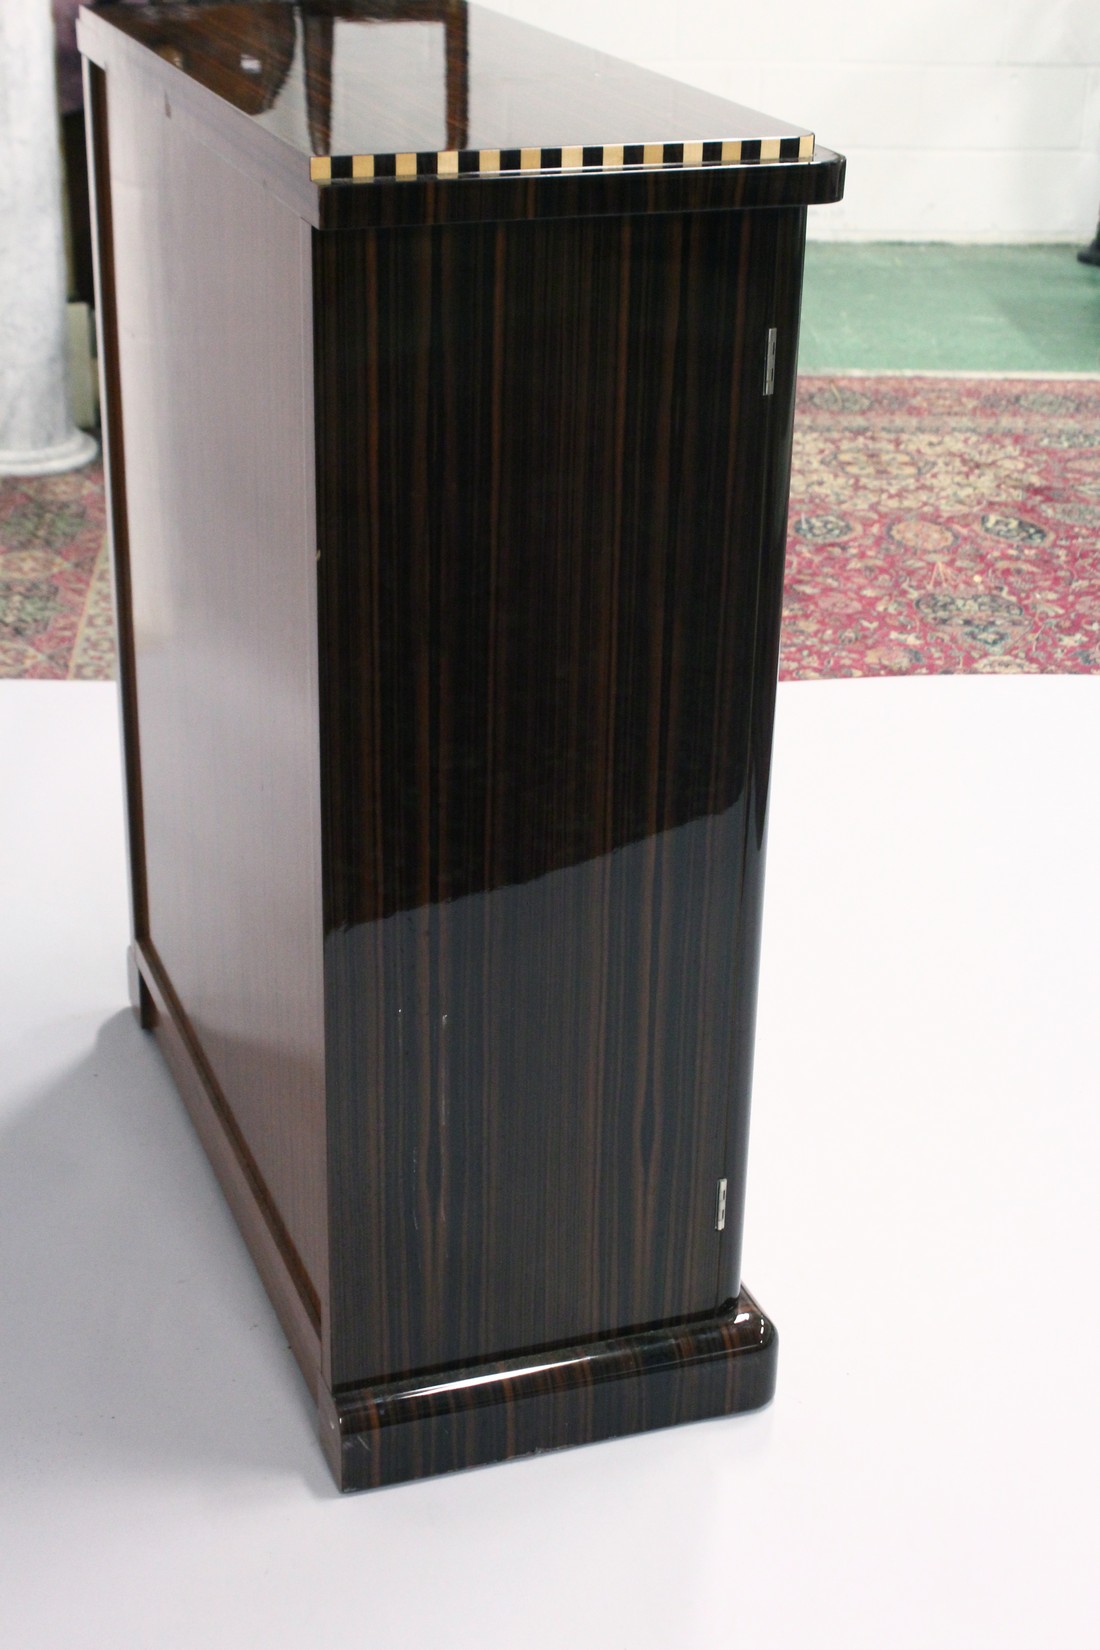 DAVID PATRICK GAGUECH (French Furniture Designer) A TWO-DOOR CABINET WITH A MACASSOR EBONY VENEER - Image 7 of 8